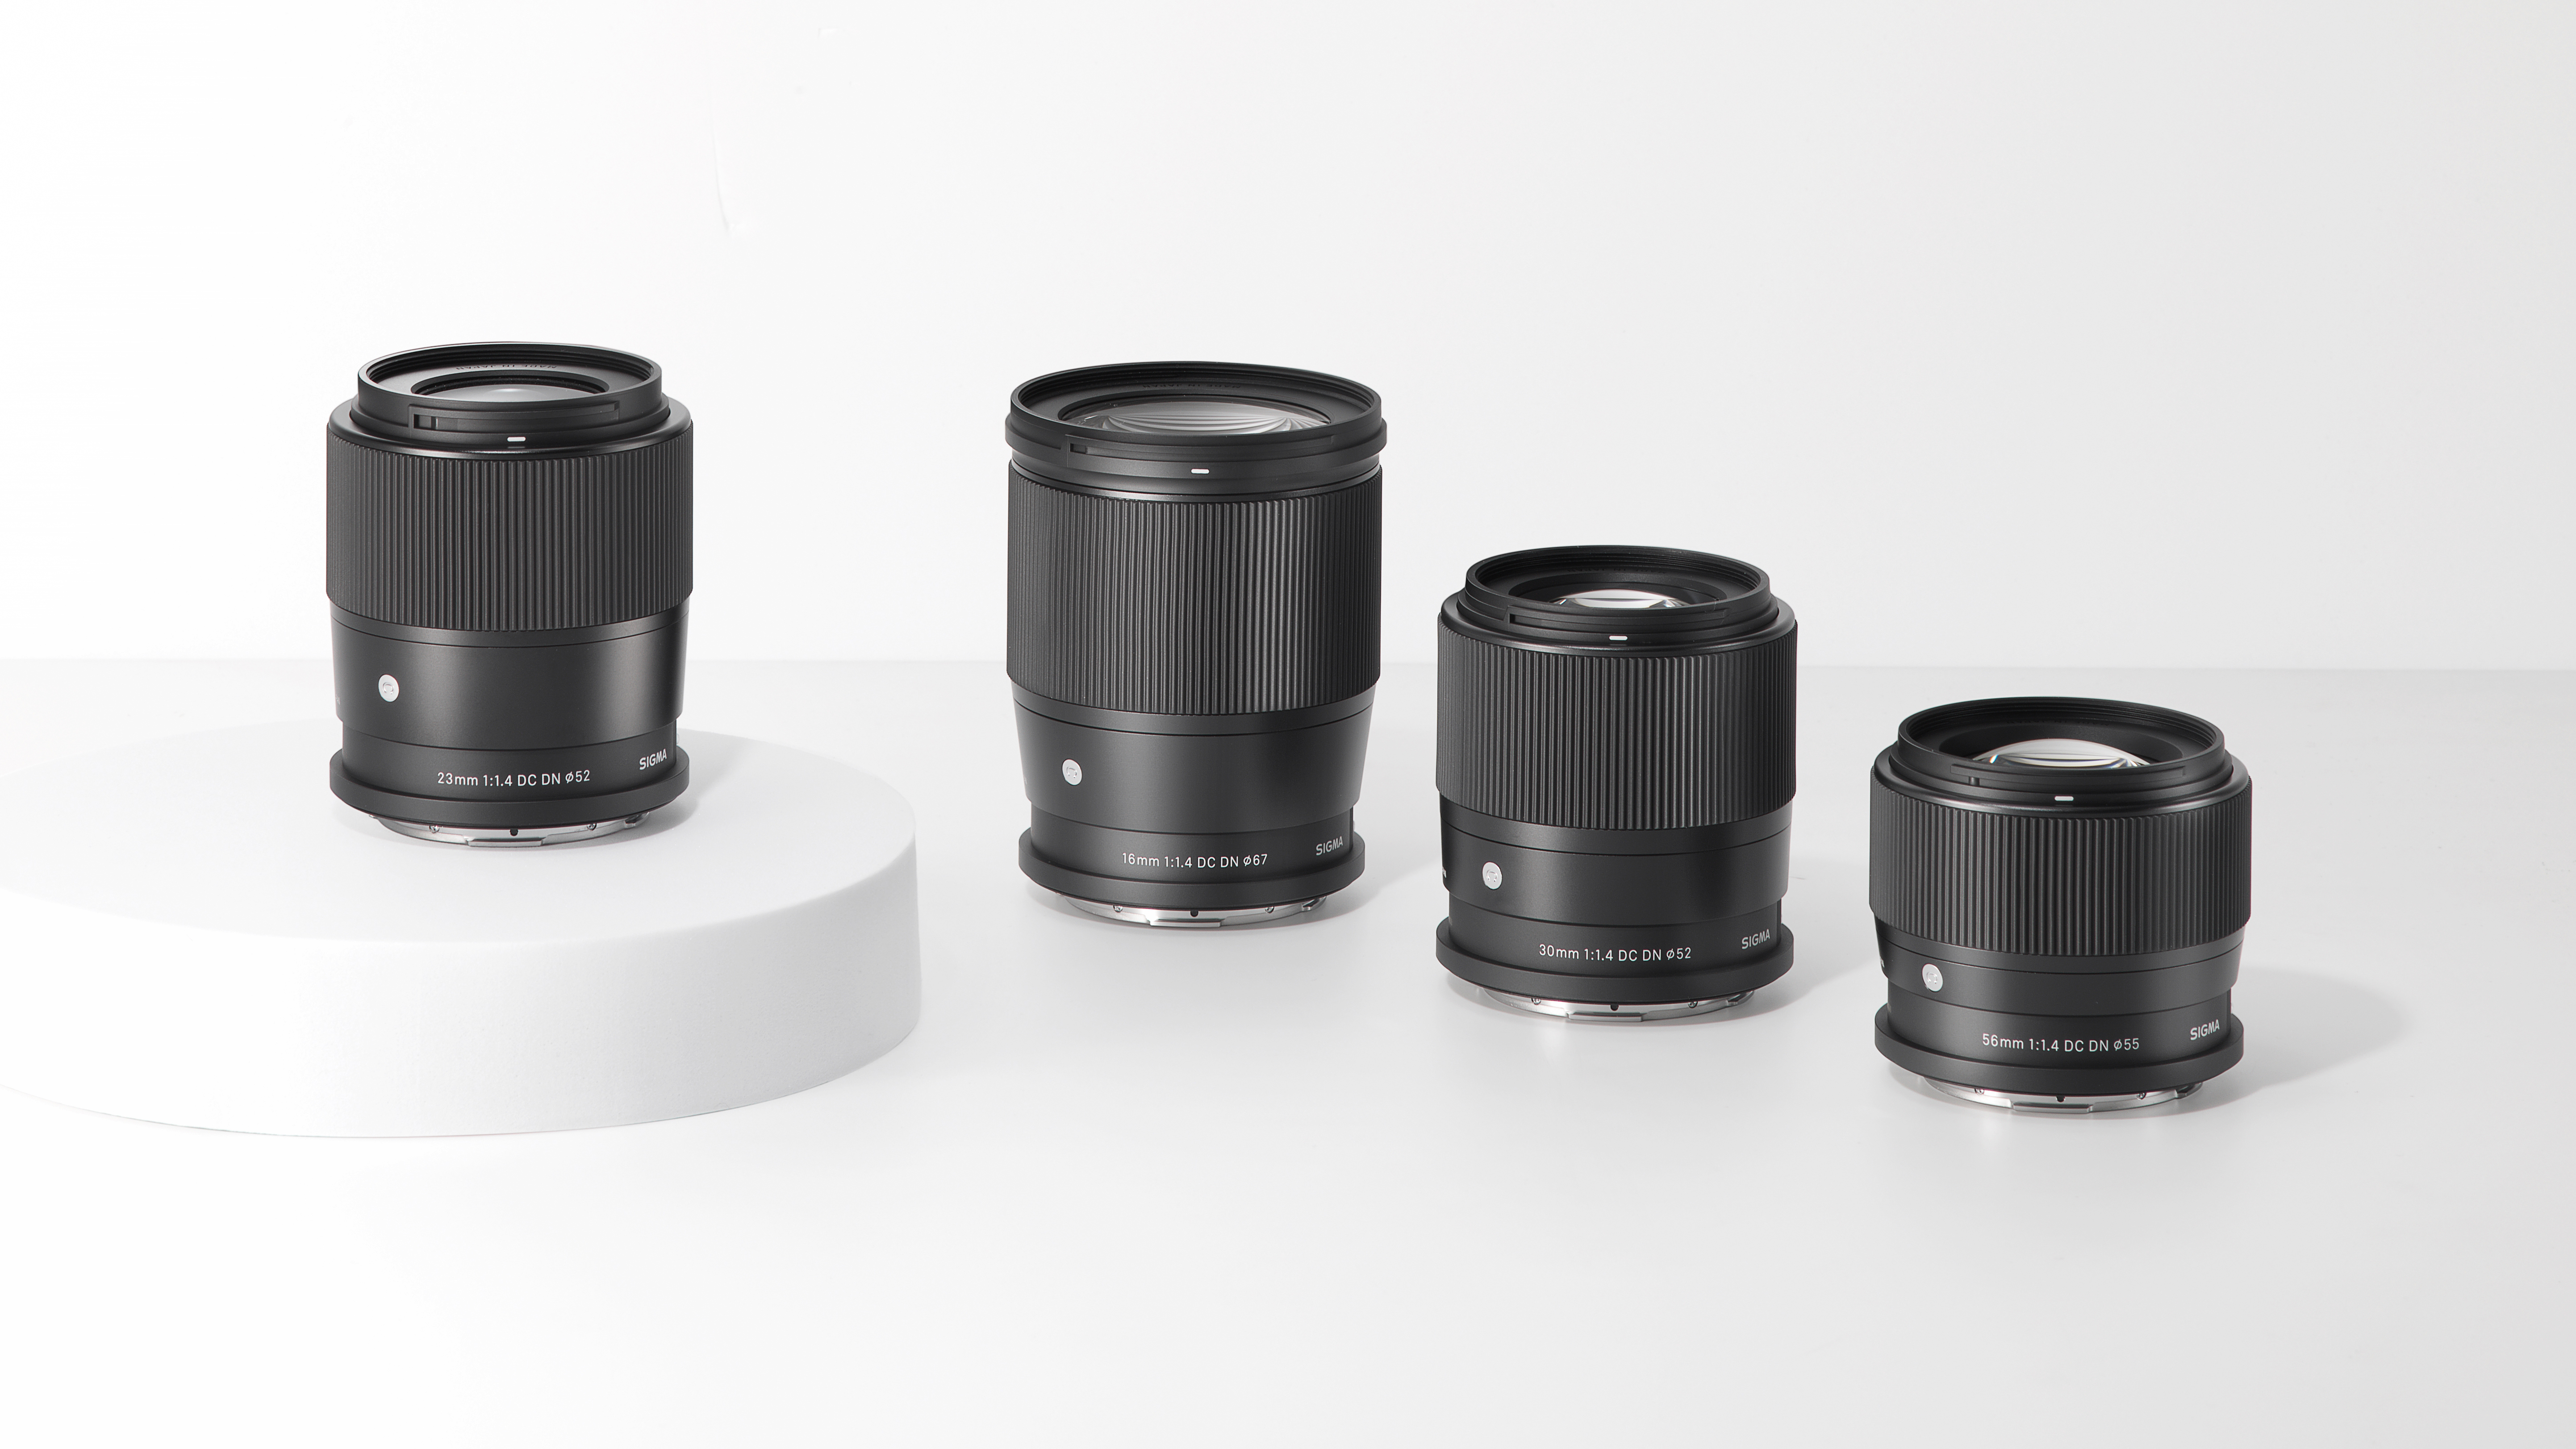 Four Sigma lenses standing on a white table